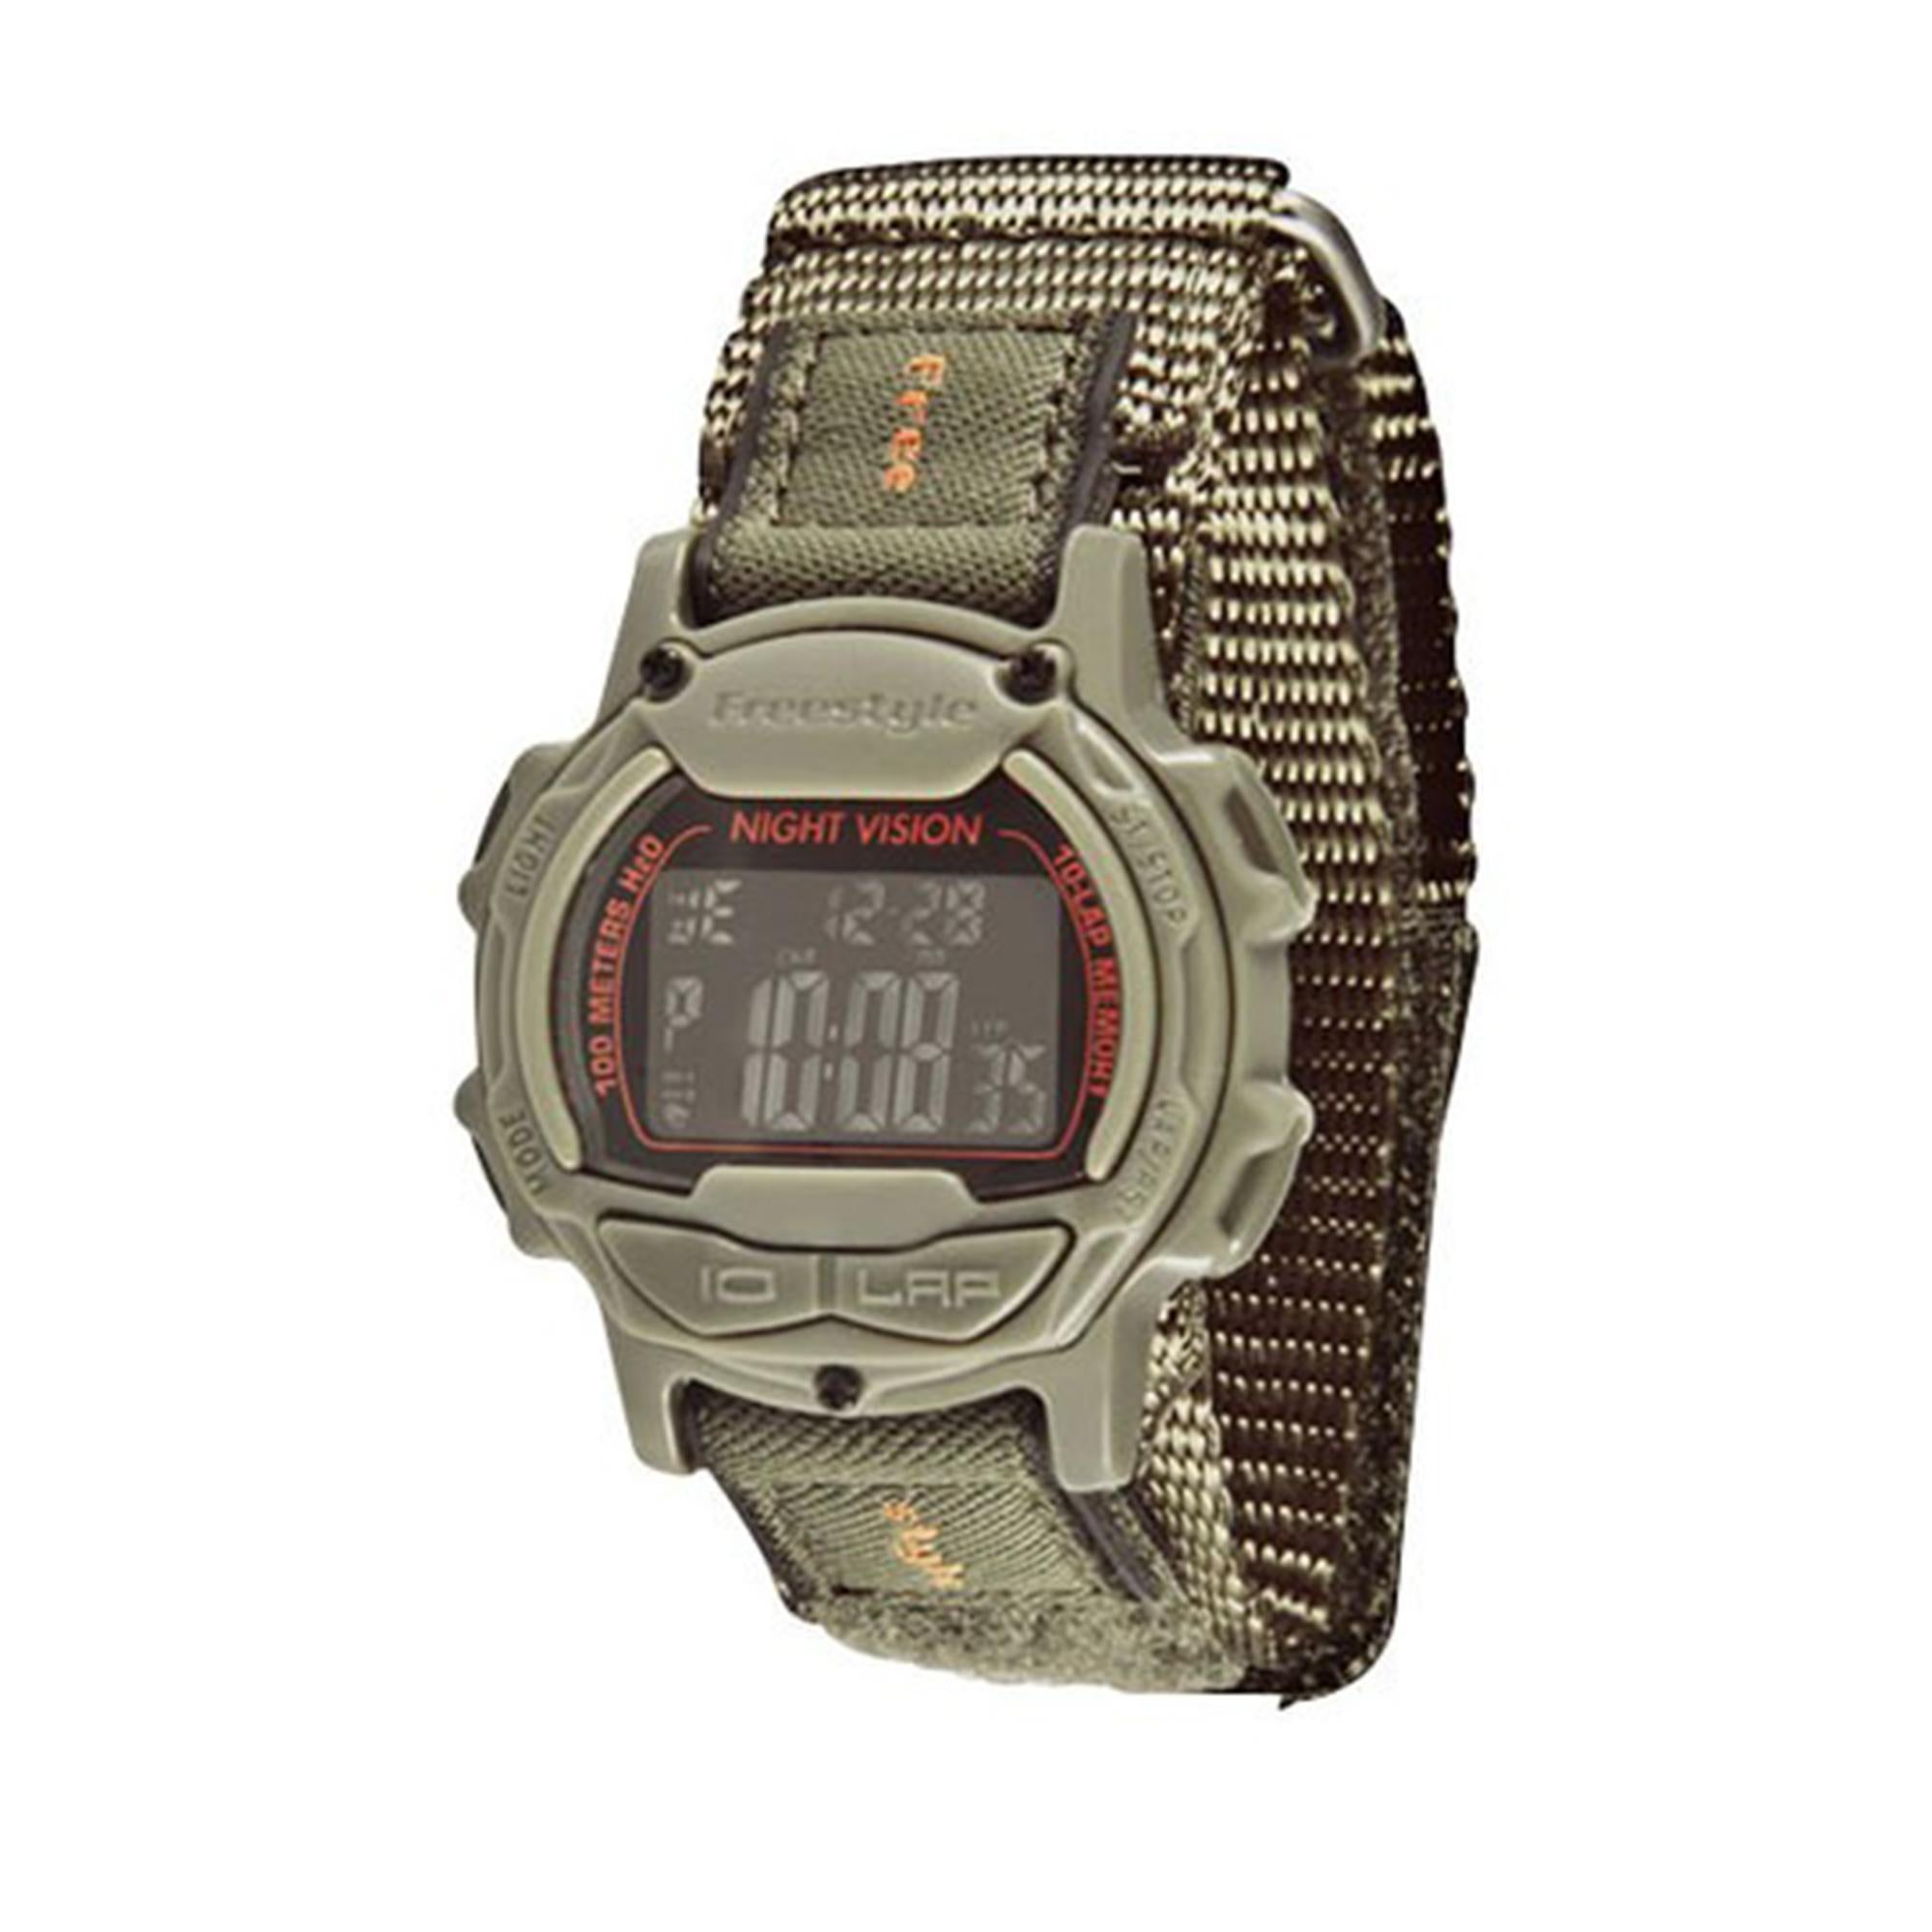 The Endurance Predator is a digital timepiece made by Freestyle. Featuring a 40mm case width sized for medium wrists, the Endurance Predator includes a nylon green strap, dual time, alarm, stopwatch, countdown timer, day/date indicators and night